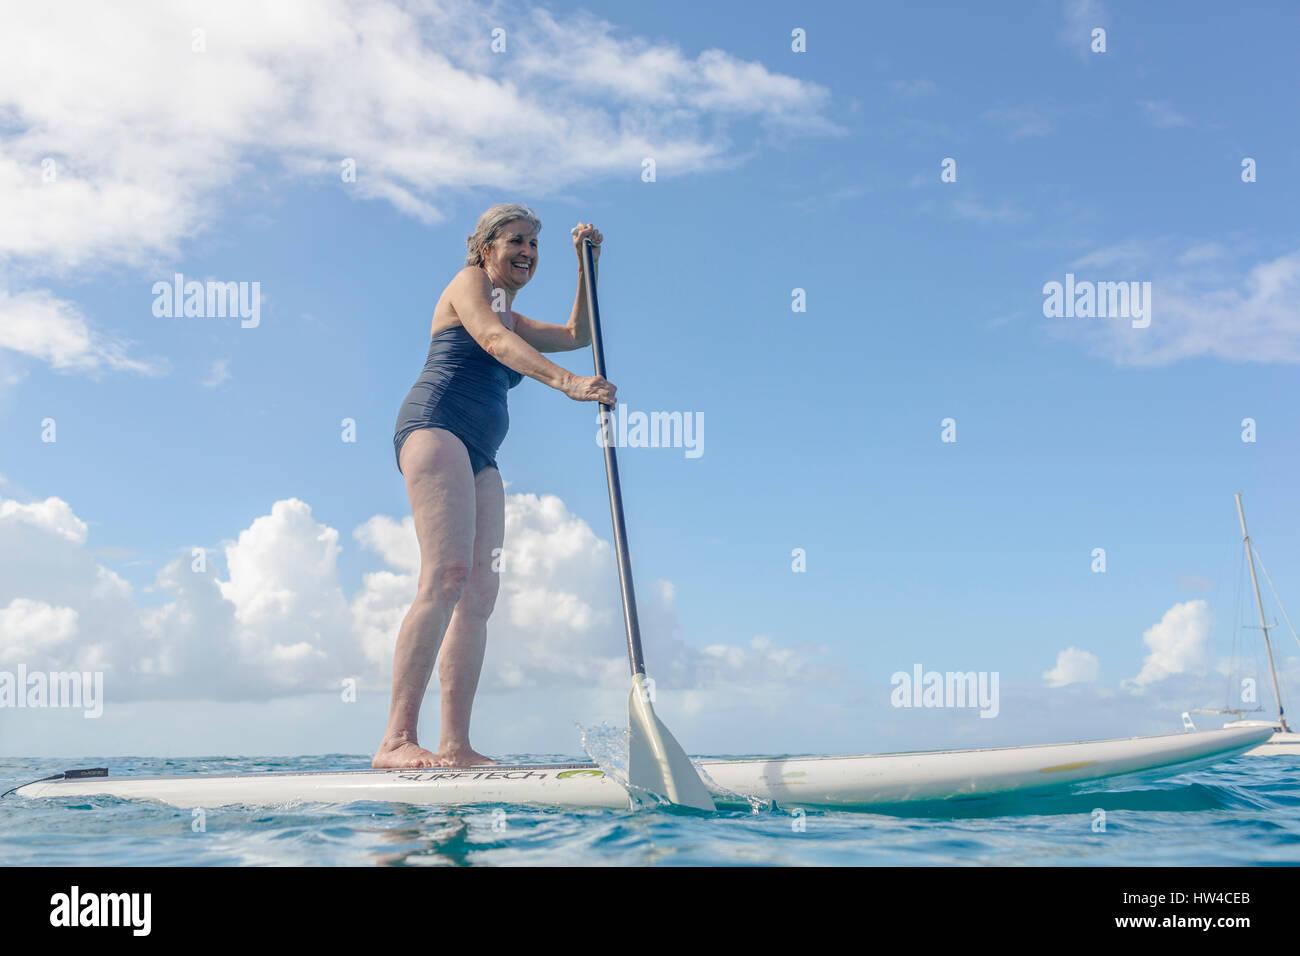 Caucasian woman standing on paddle board on ocean Banque D'Images